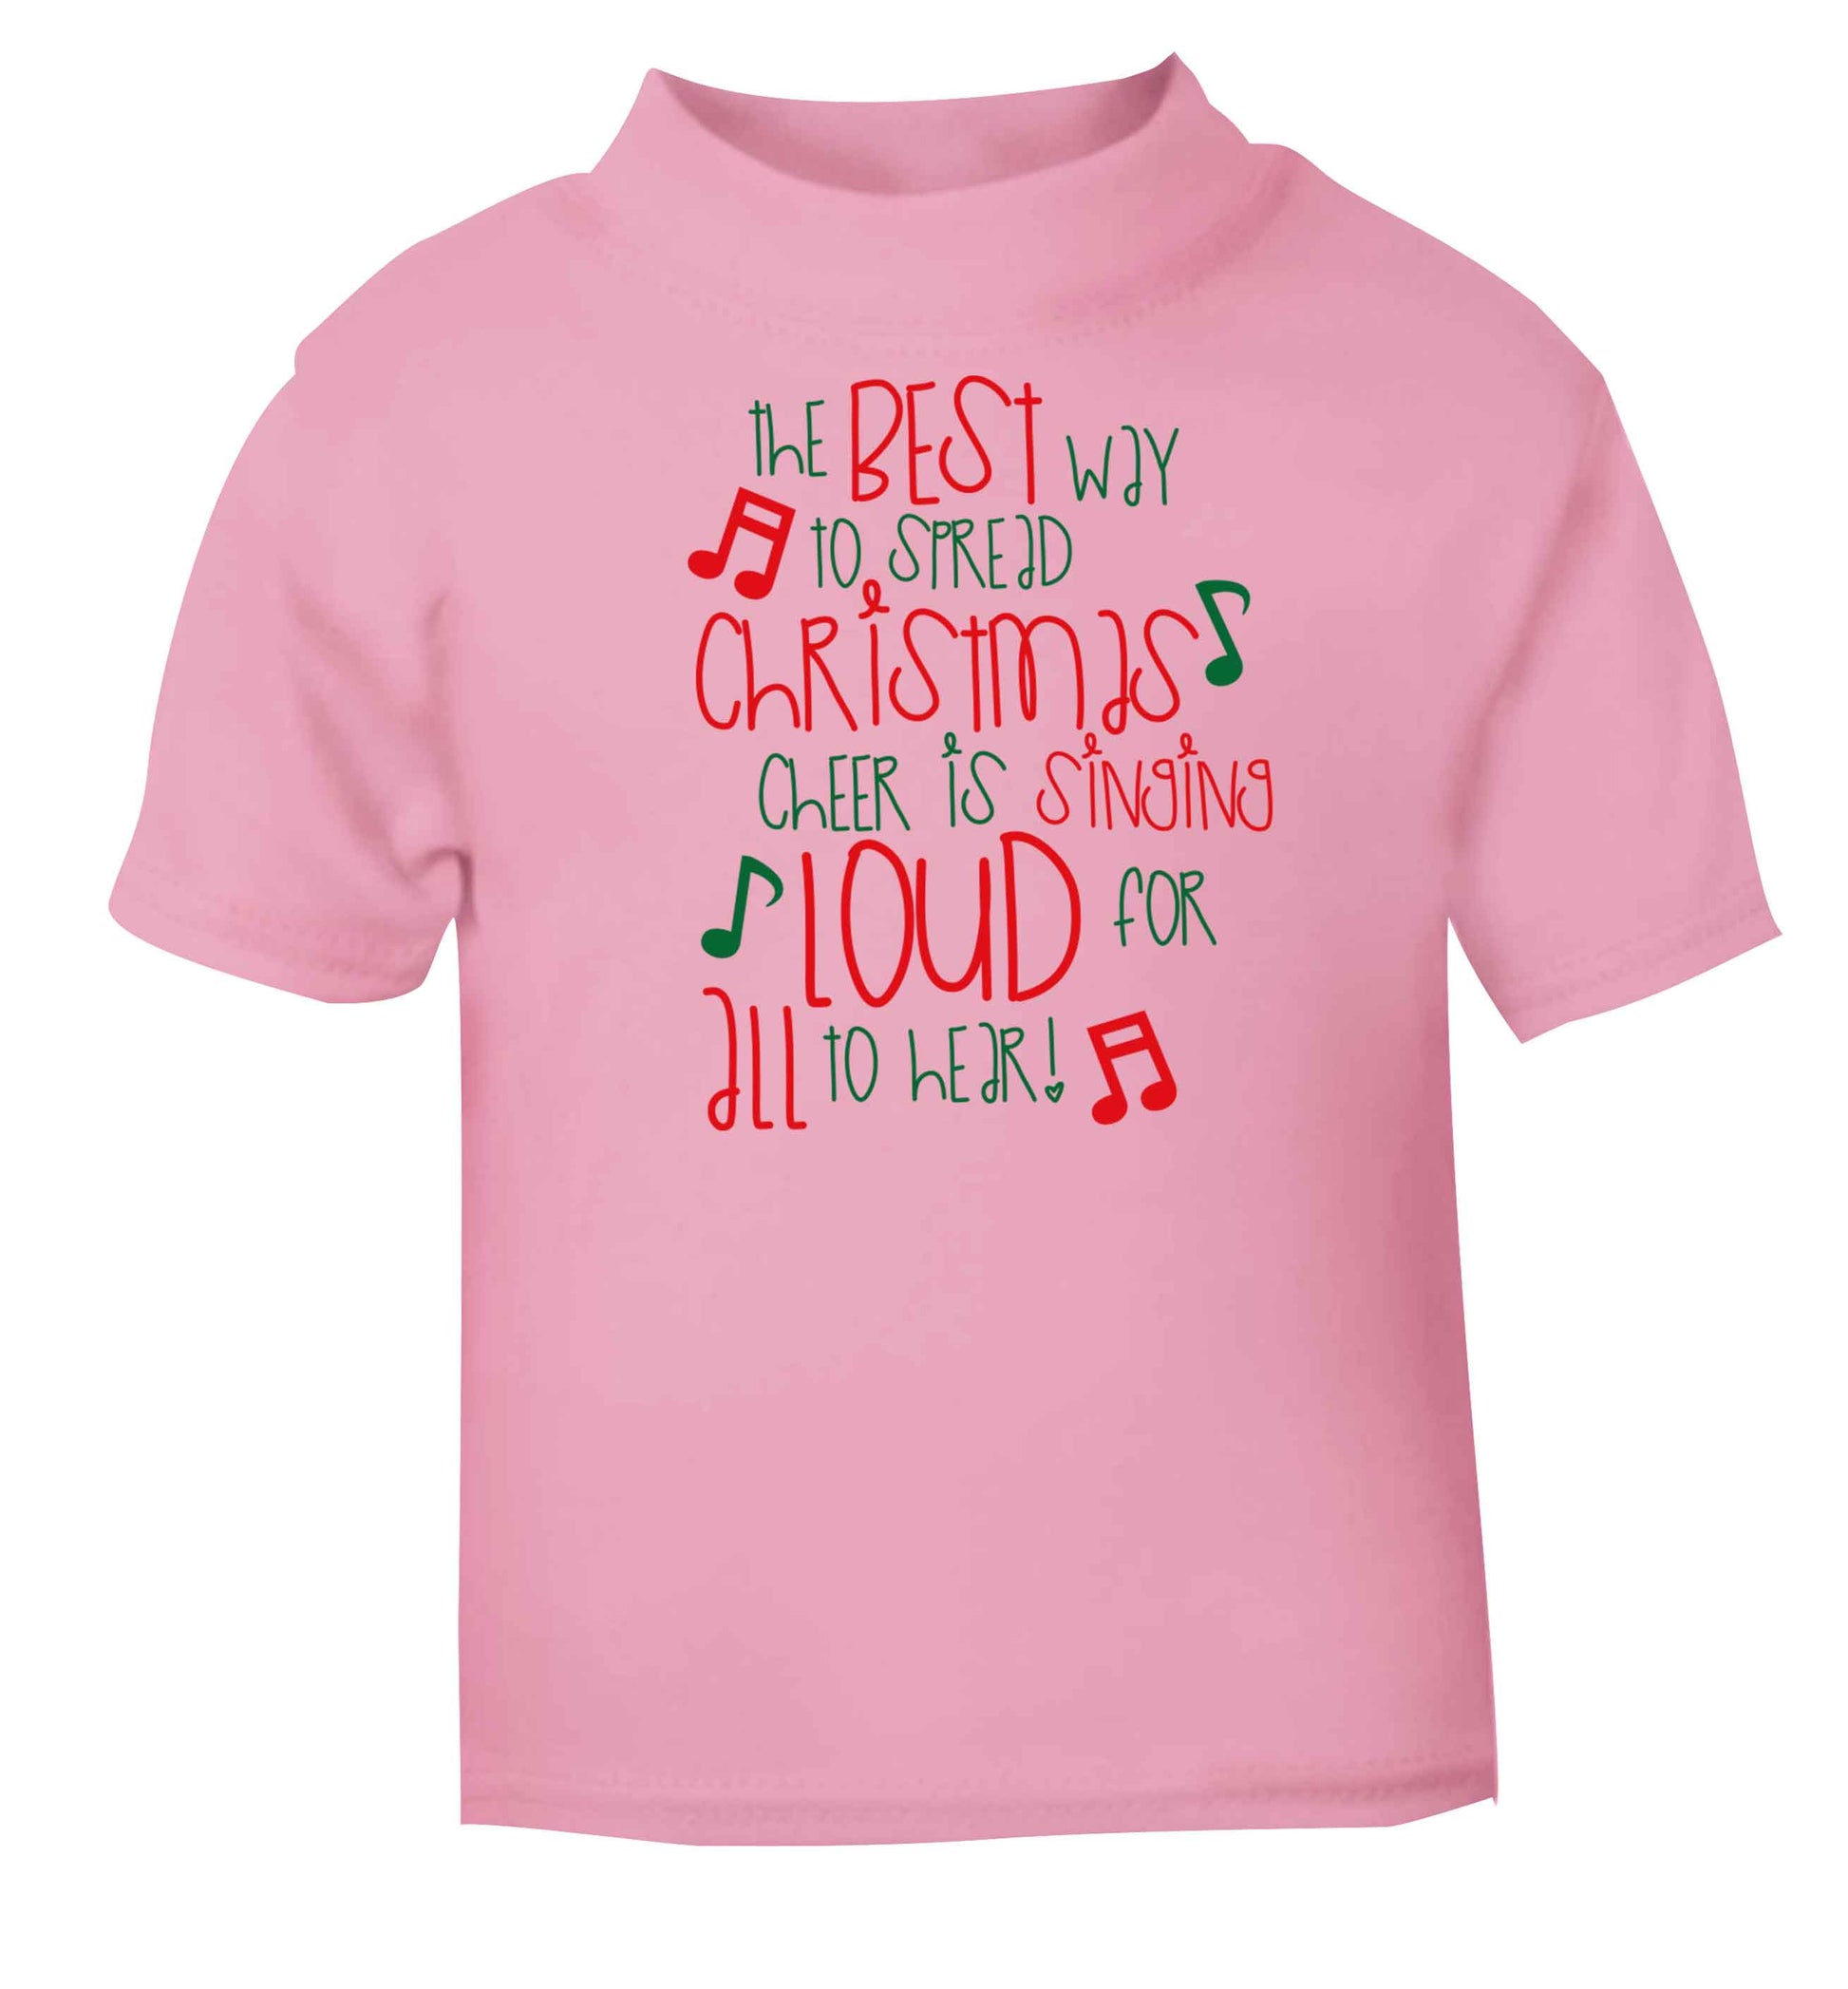 The best way to spread Christmas cheer is singing loud for all to hear light pink baby toddler Tshirt 2 Years